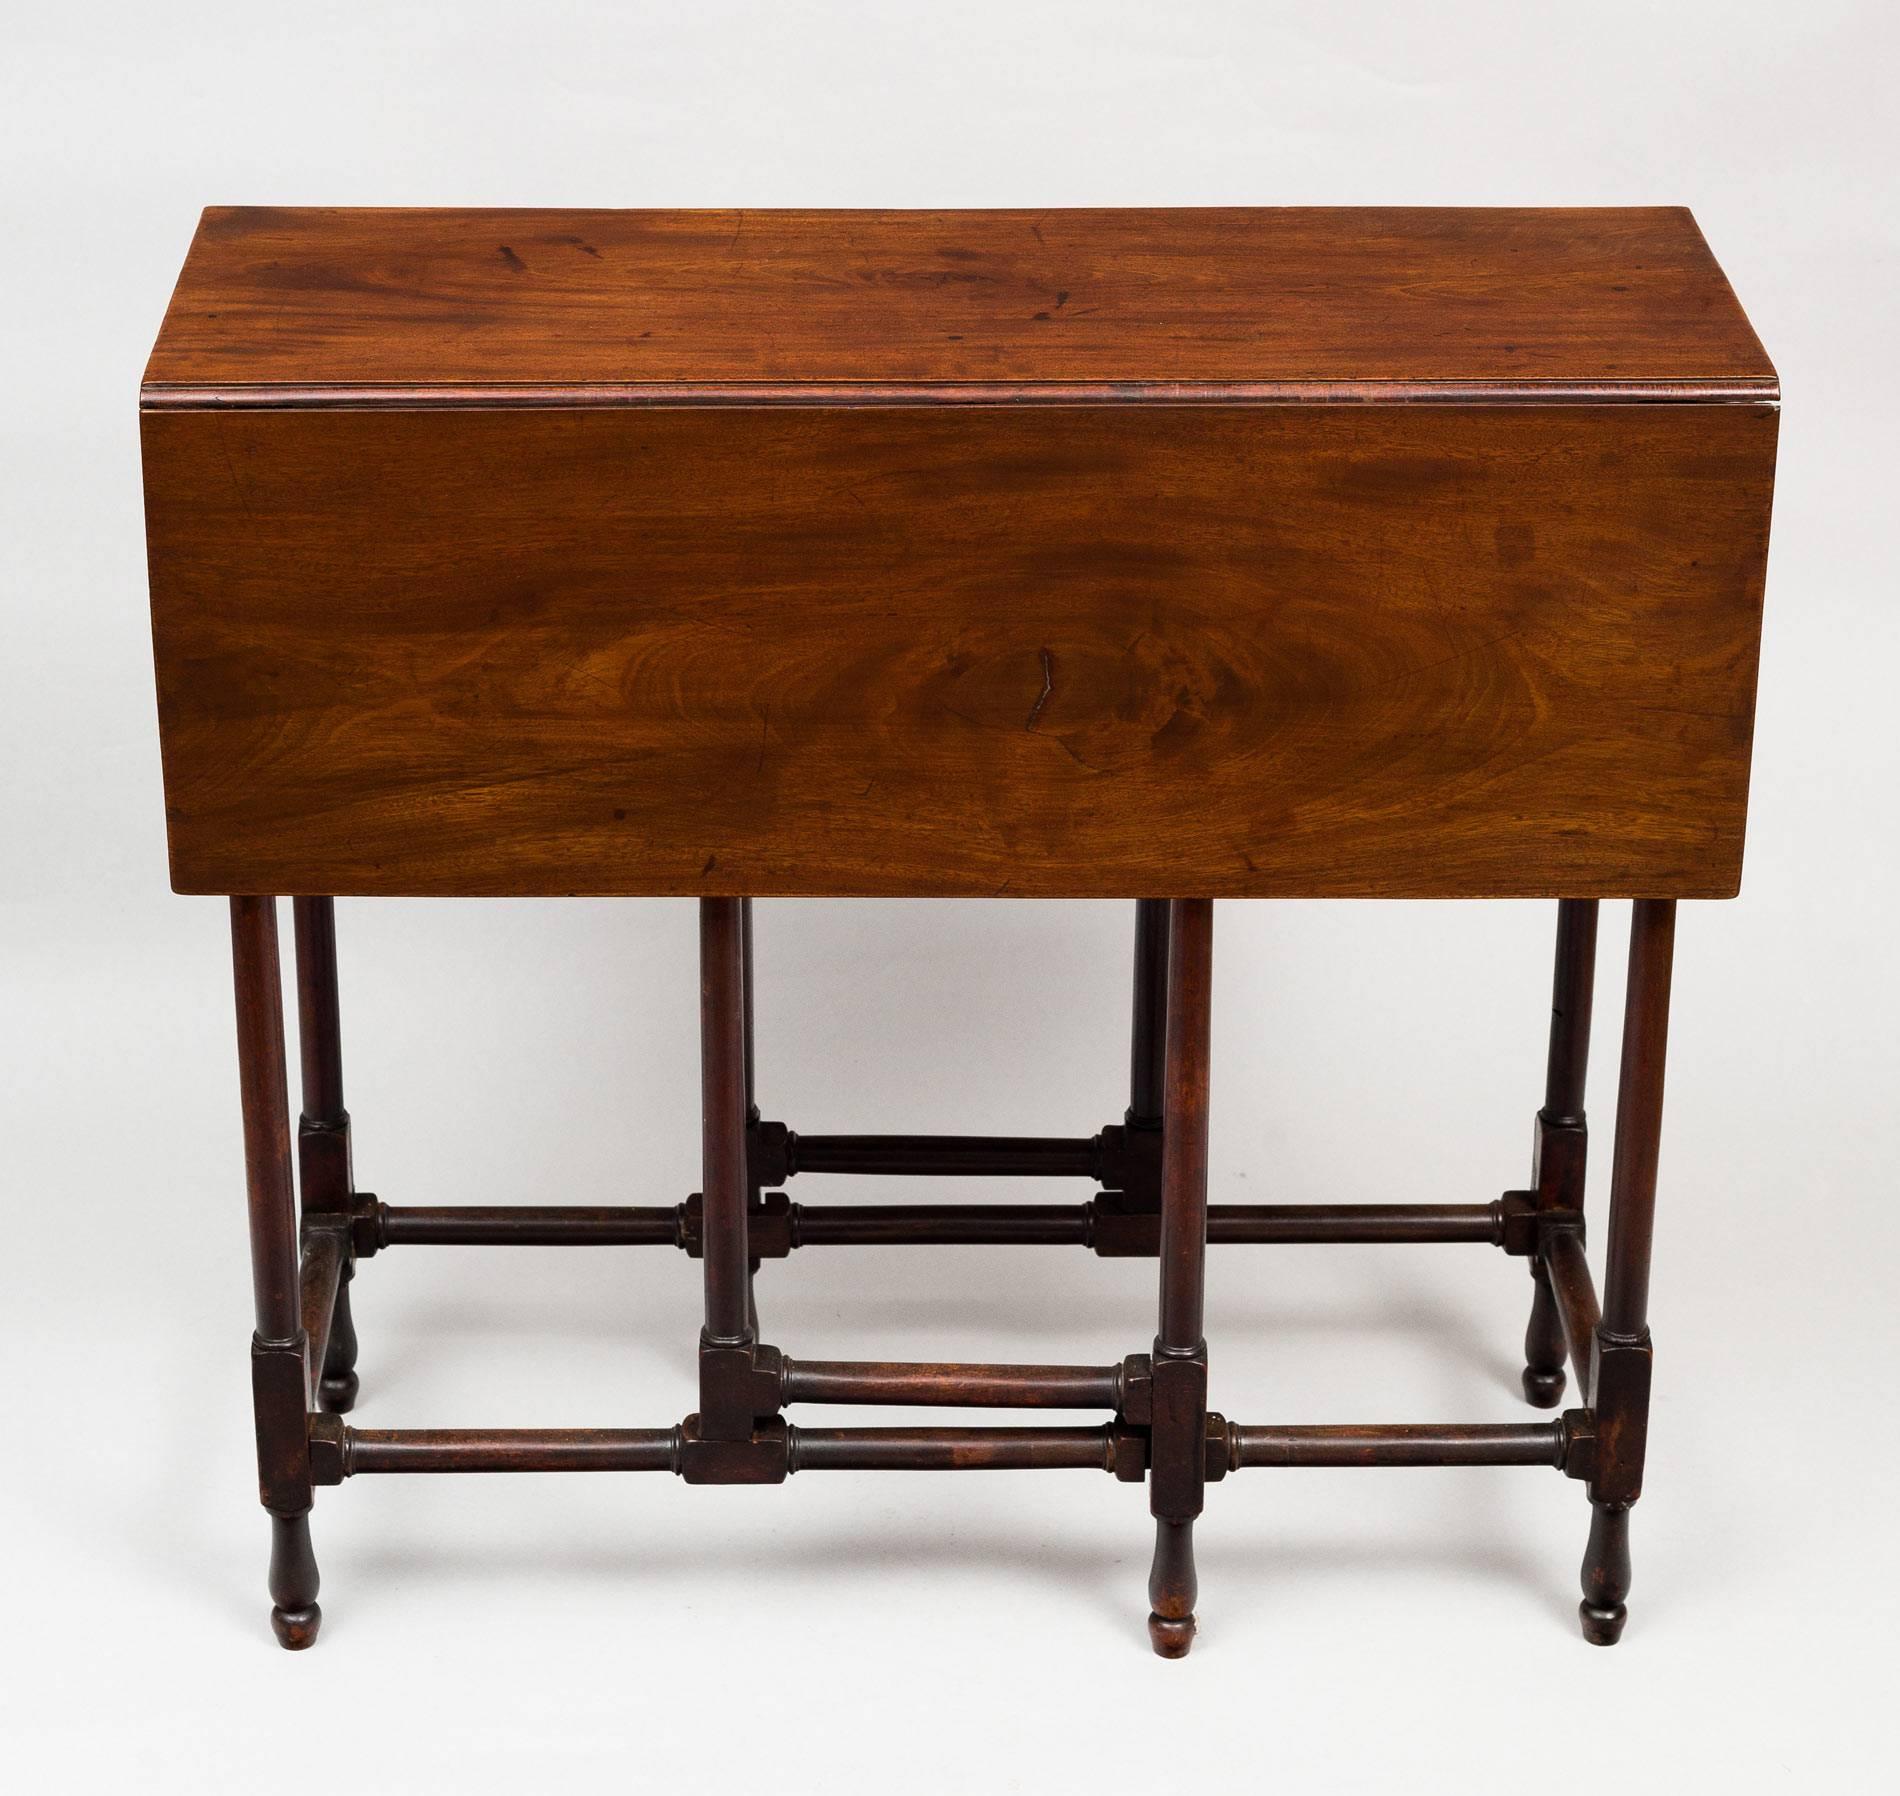 Georgian mahogany spider leg table having a rectangular top with two drop leaves that are supported by slender turned gate legs and are joined by carved and turned stretchers. It has a rich patina and color.